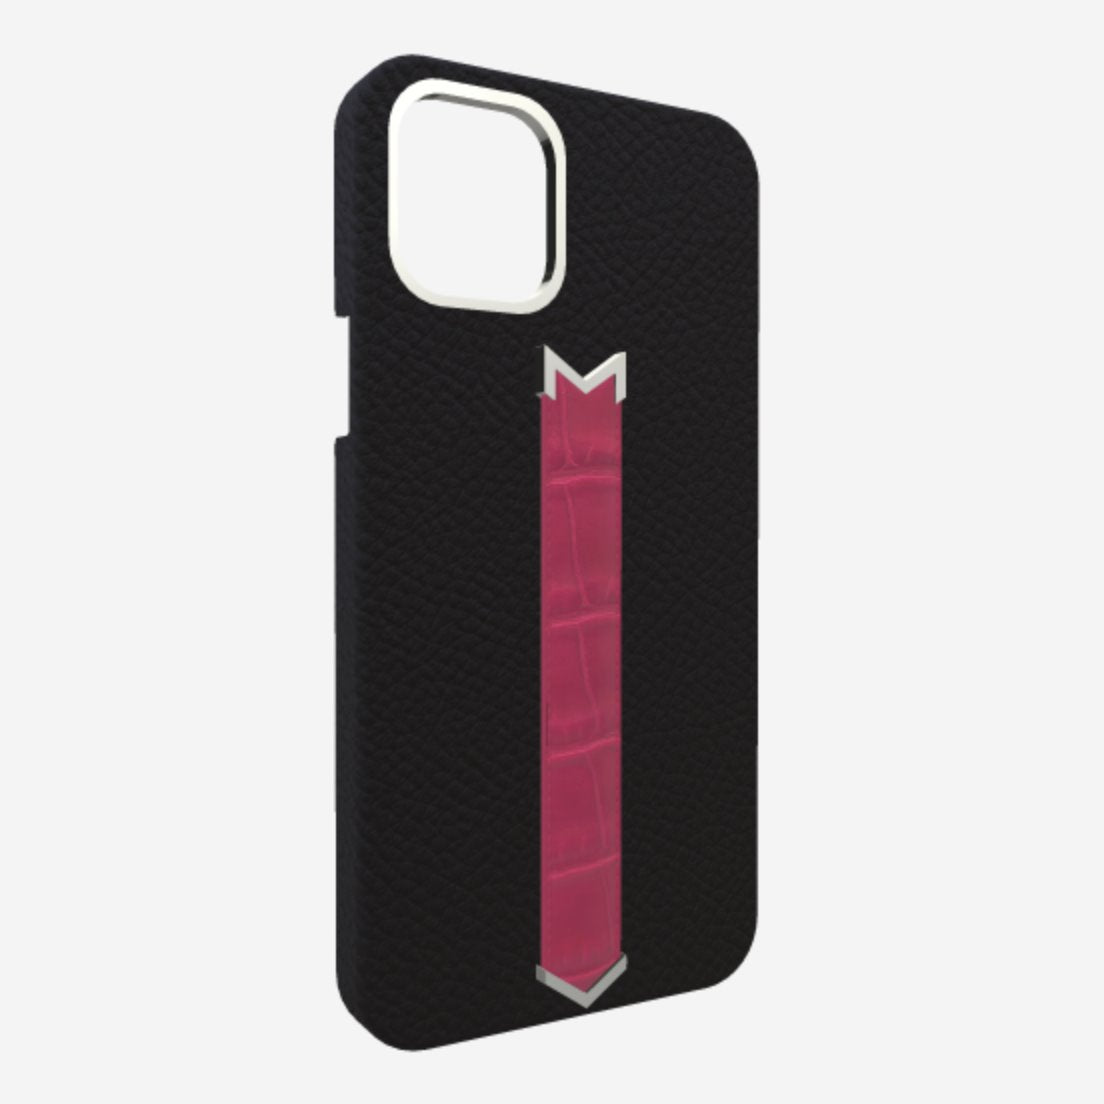 Silver Finger Strap Case for iPhone 13 in Genuine Calfskin and Alligator Bond-Black Fuchsia-Party 